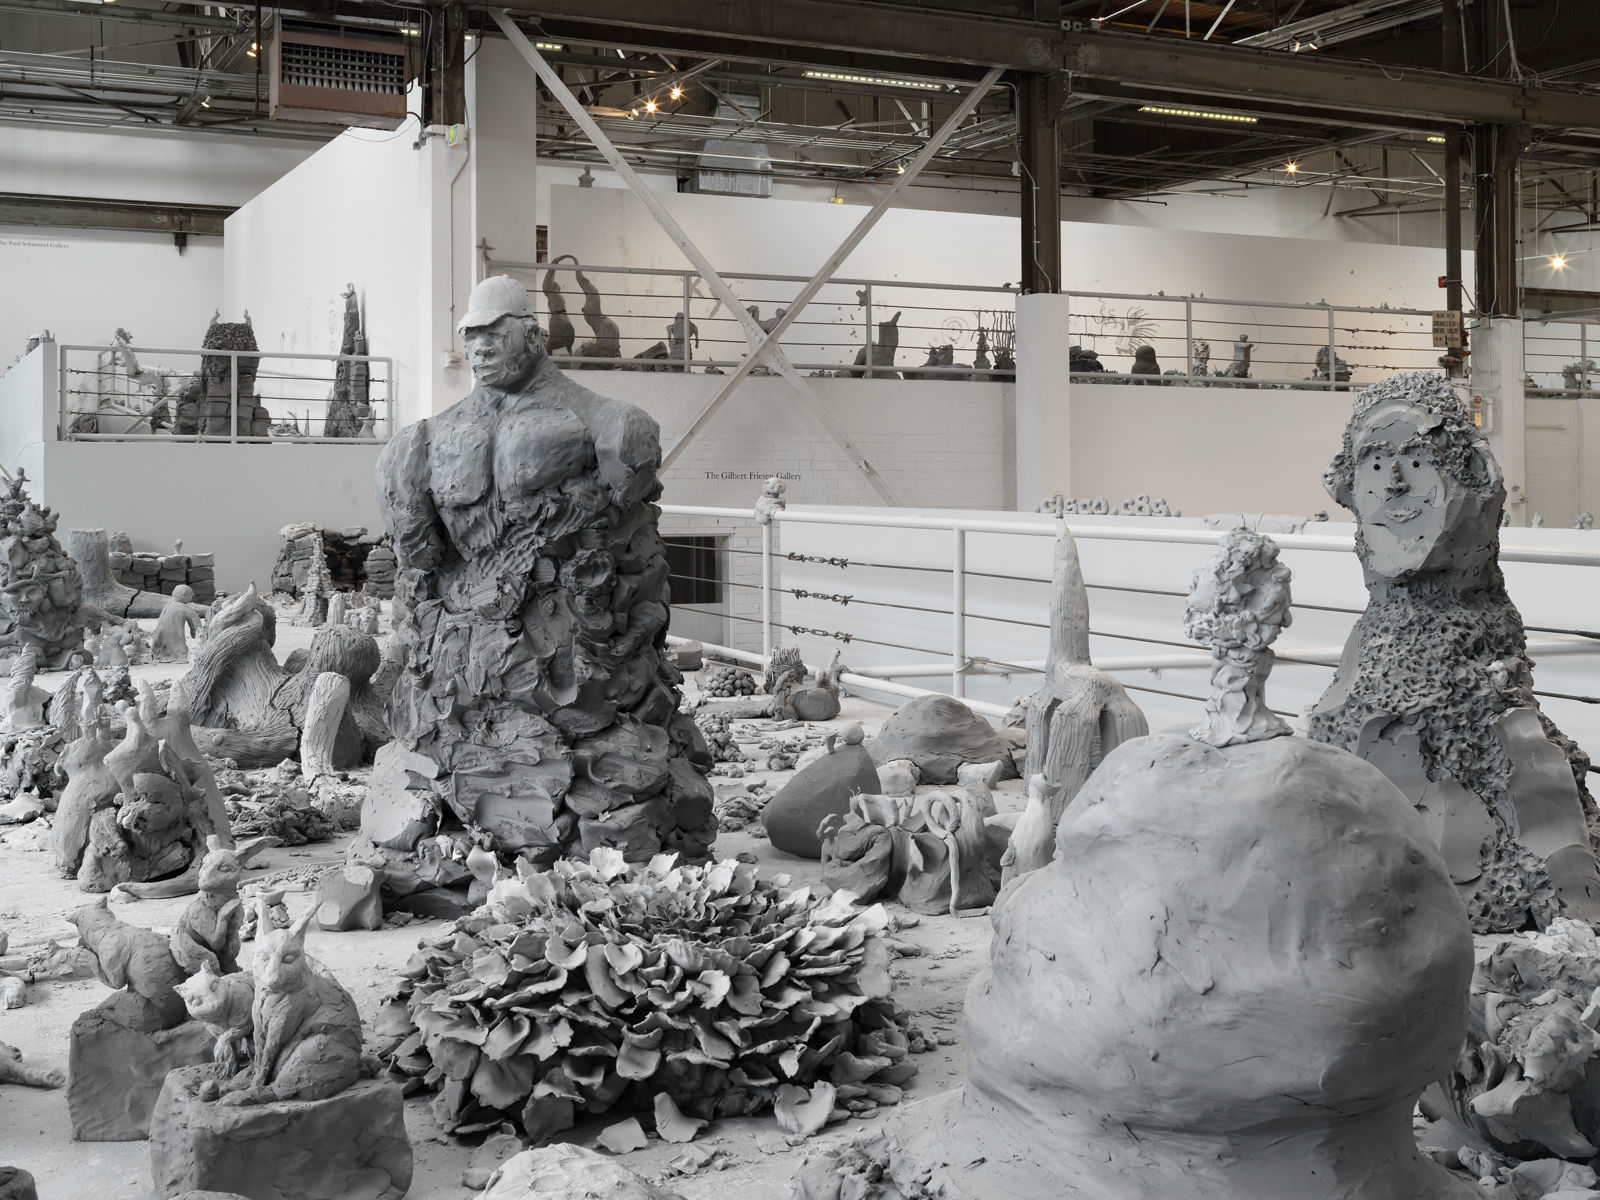 Urs Fischer and various artists, YES, 2011&ndash;ongoingUnfired clay sculptures modeled on-site by multiple authorsDimensions variableInstallation view, &nbsp;"Urs Fischer," The Geffen Contemporary, The Museum of Contemporary Art, Los Angeles, 2013&copy; Urs Fischer. Courtesy of the artists. Photo: Cassandra MacLeod